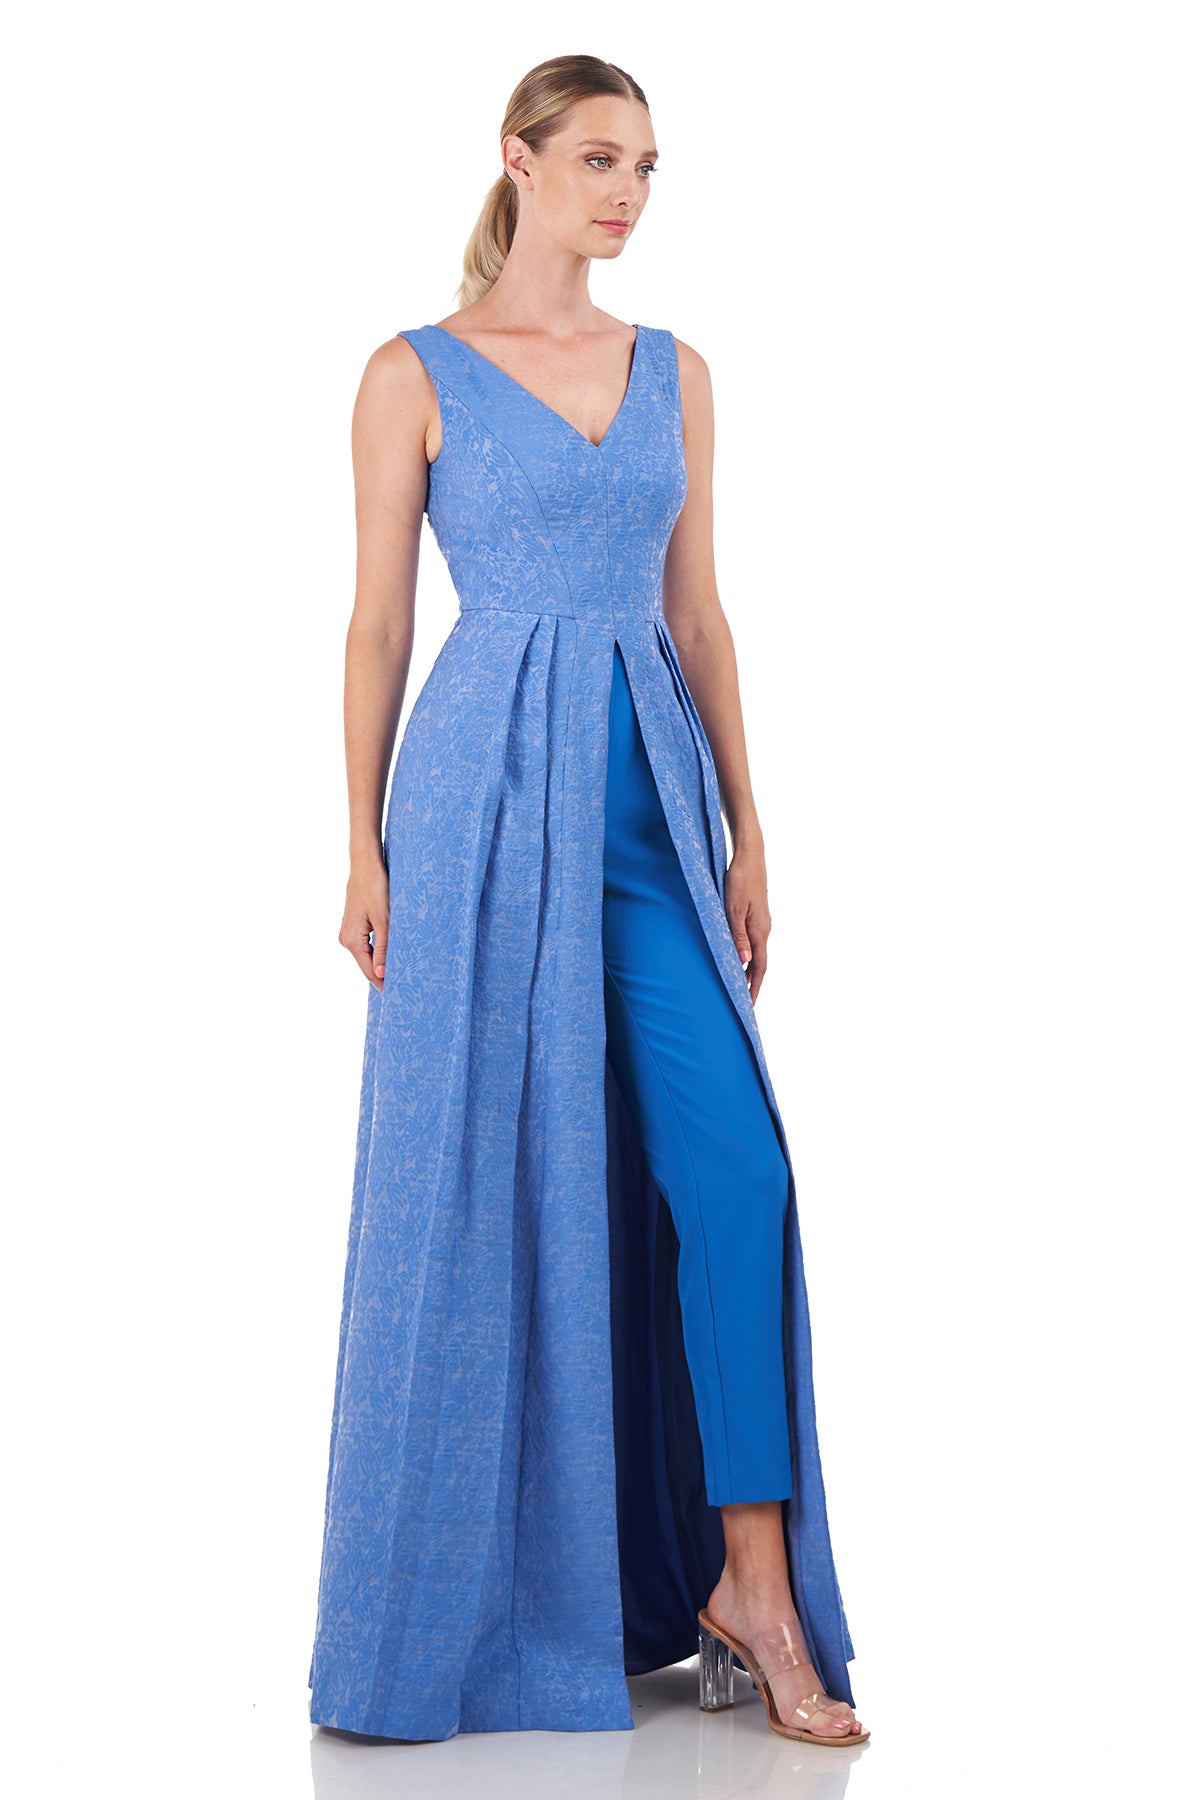 💙 KAY UNGER Peacock Blue Alessandra Jumpsuit Gown Overlay Stretch Crepe 10  US